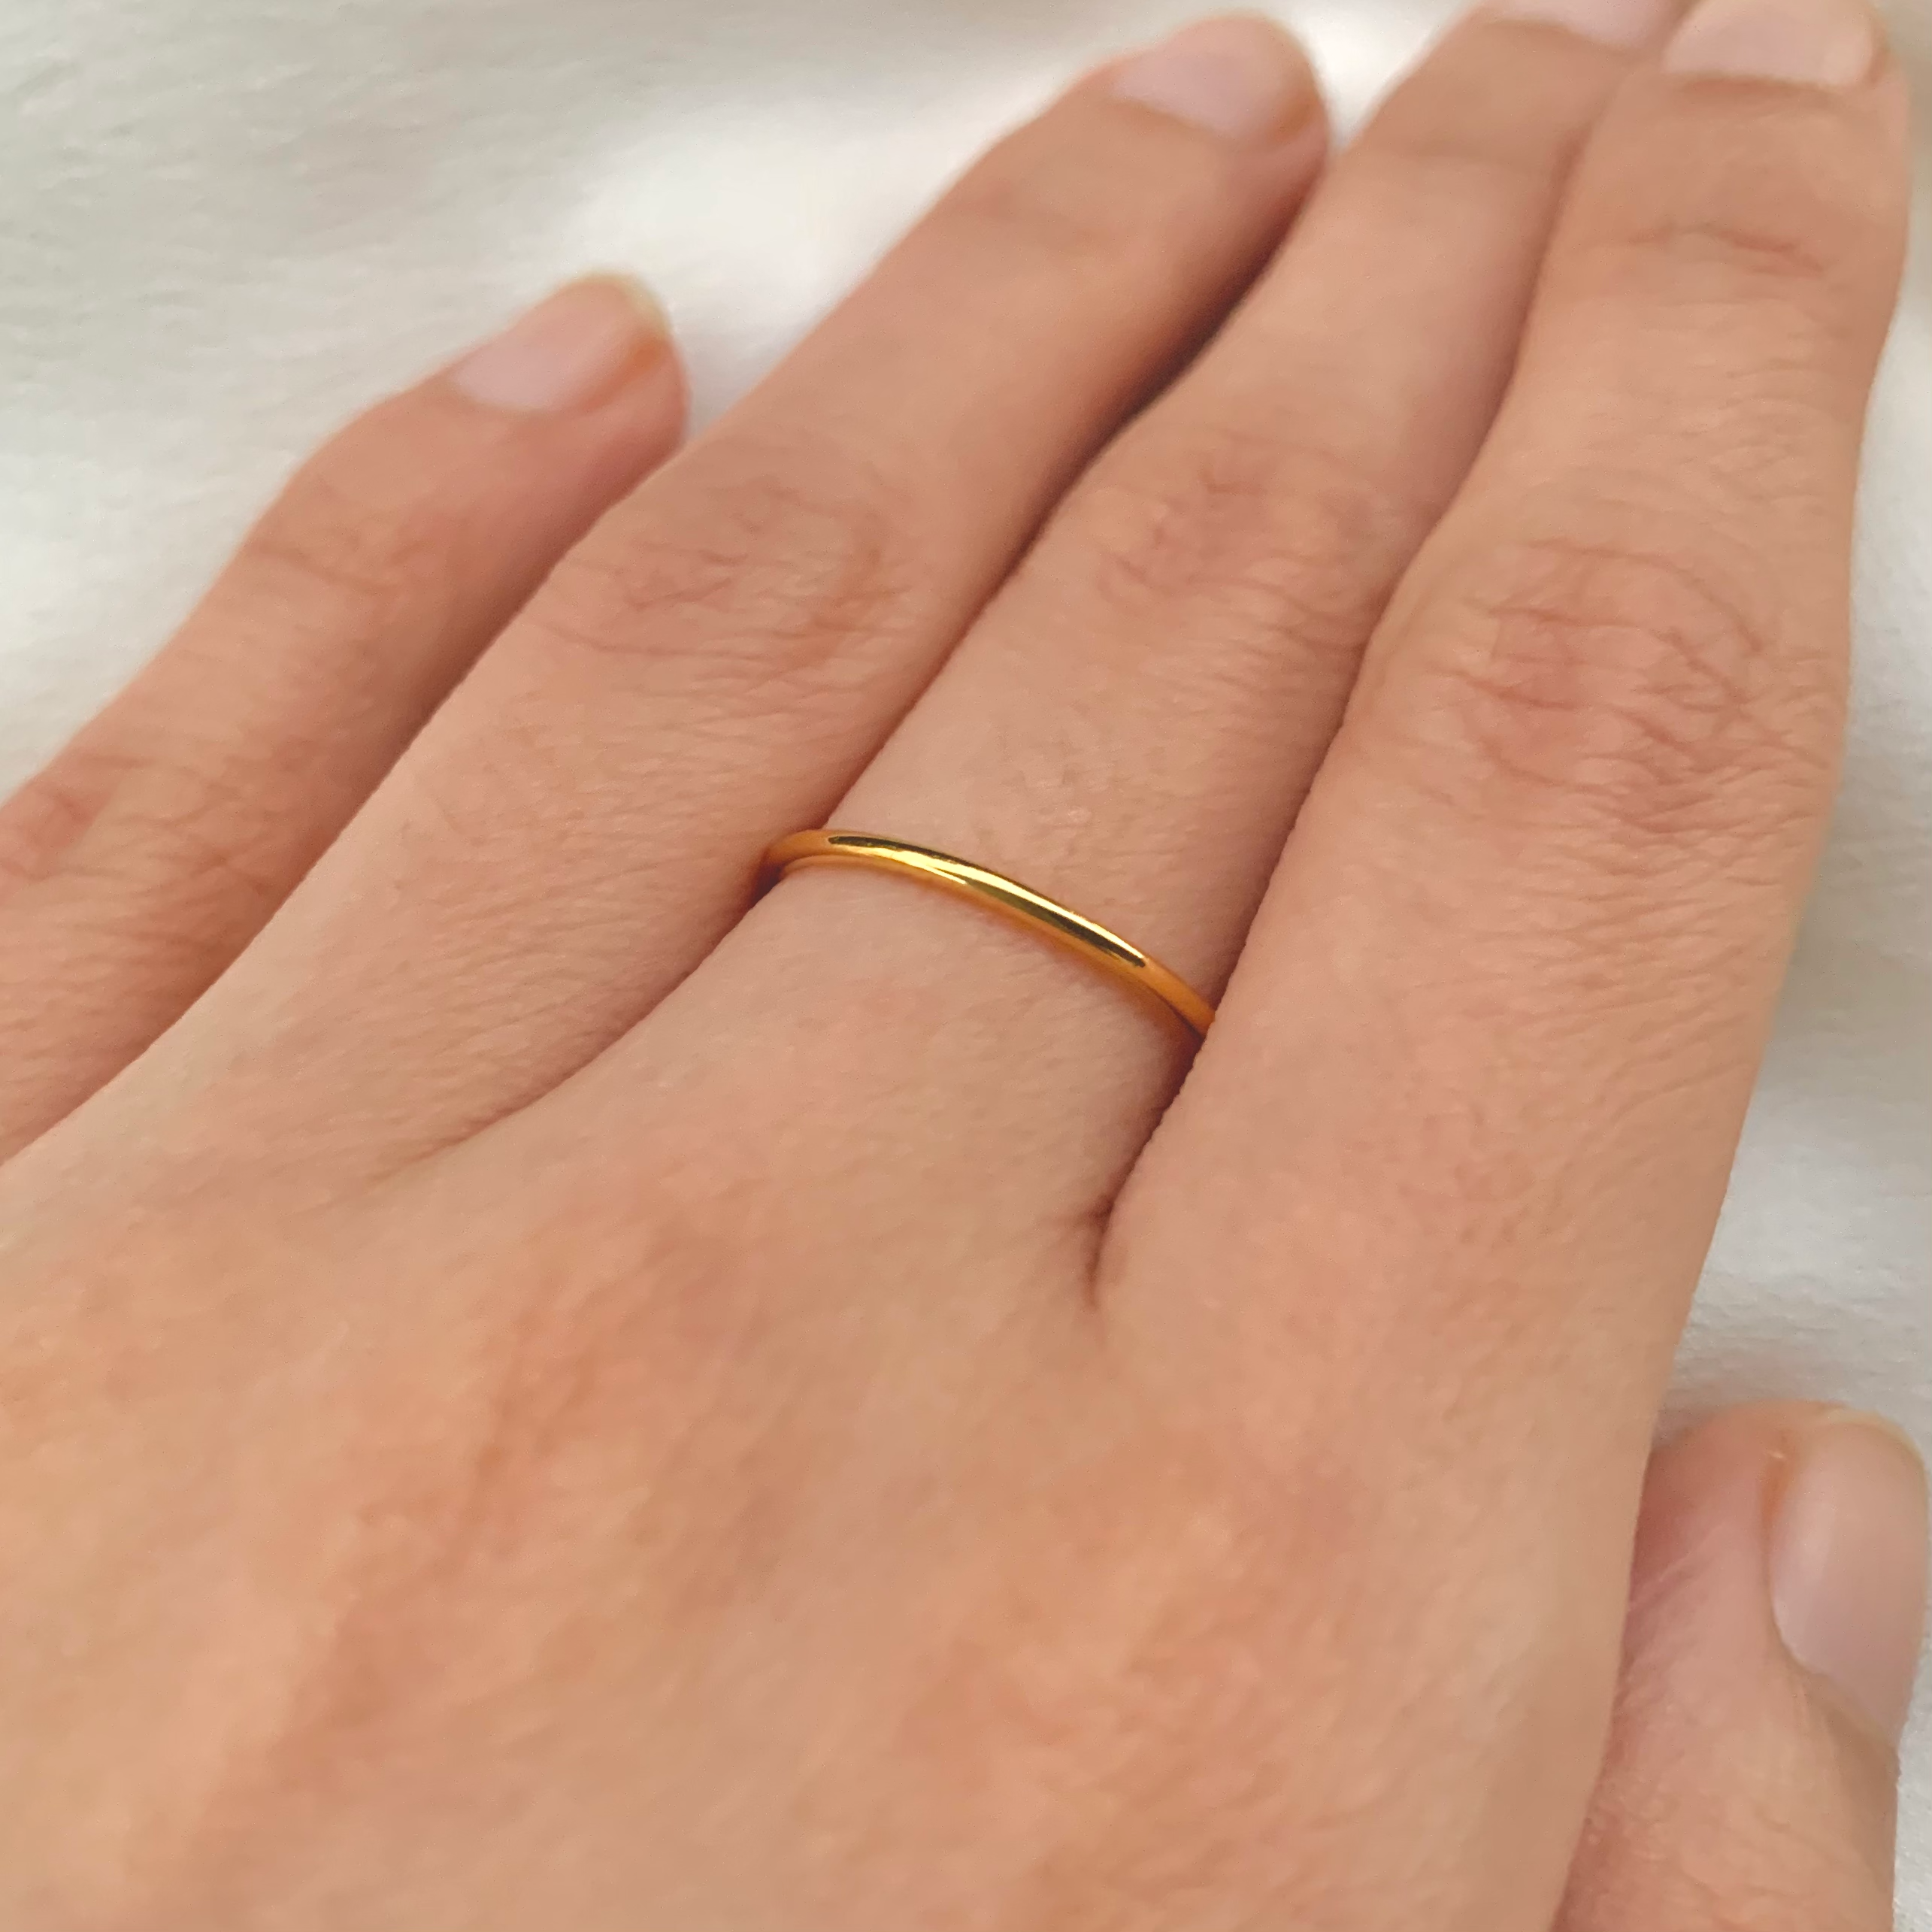 Buy 14K Solid Gold Star Ring With Zircone Stone Womens Gold Rings Daily Ring  Birthday Gift Gift for Her Gift for Mother, Gold Star Ring Online in India  - Etsy